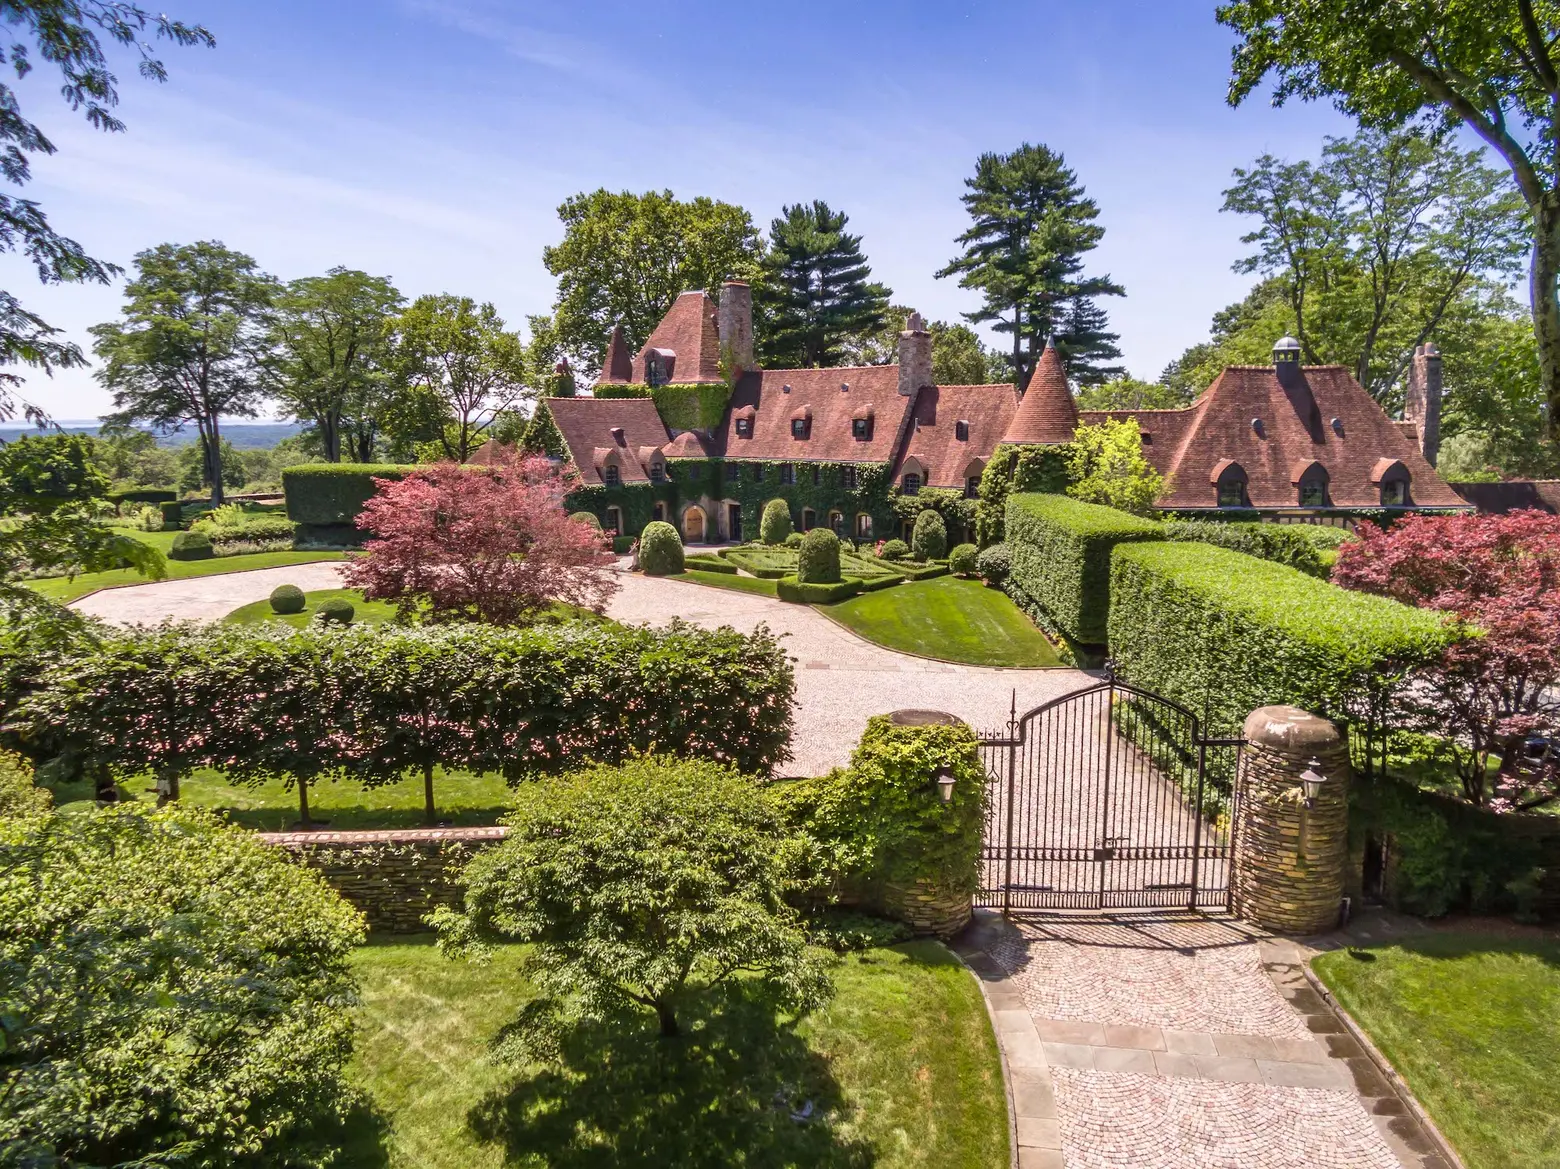 Fashion designer Vince Camuto's breathtaking French chateau-style Greenwich  estate headed for auction in August